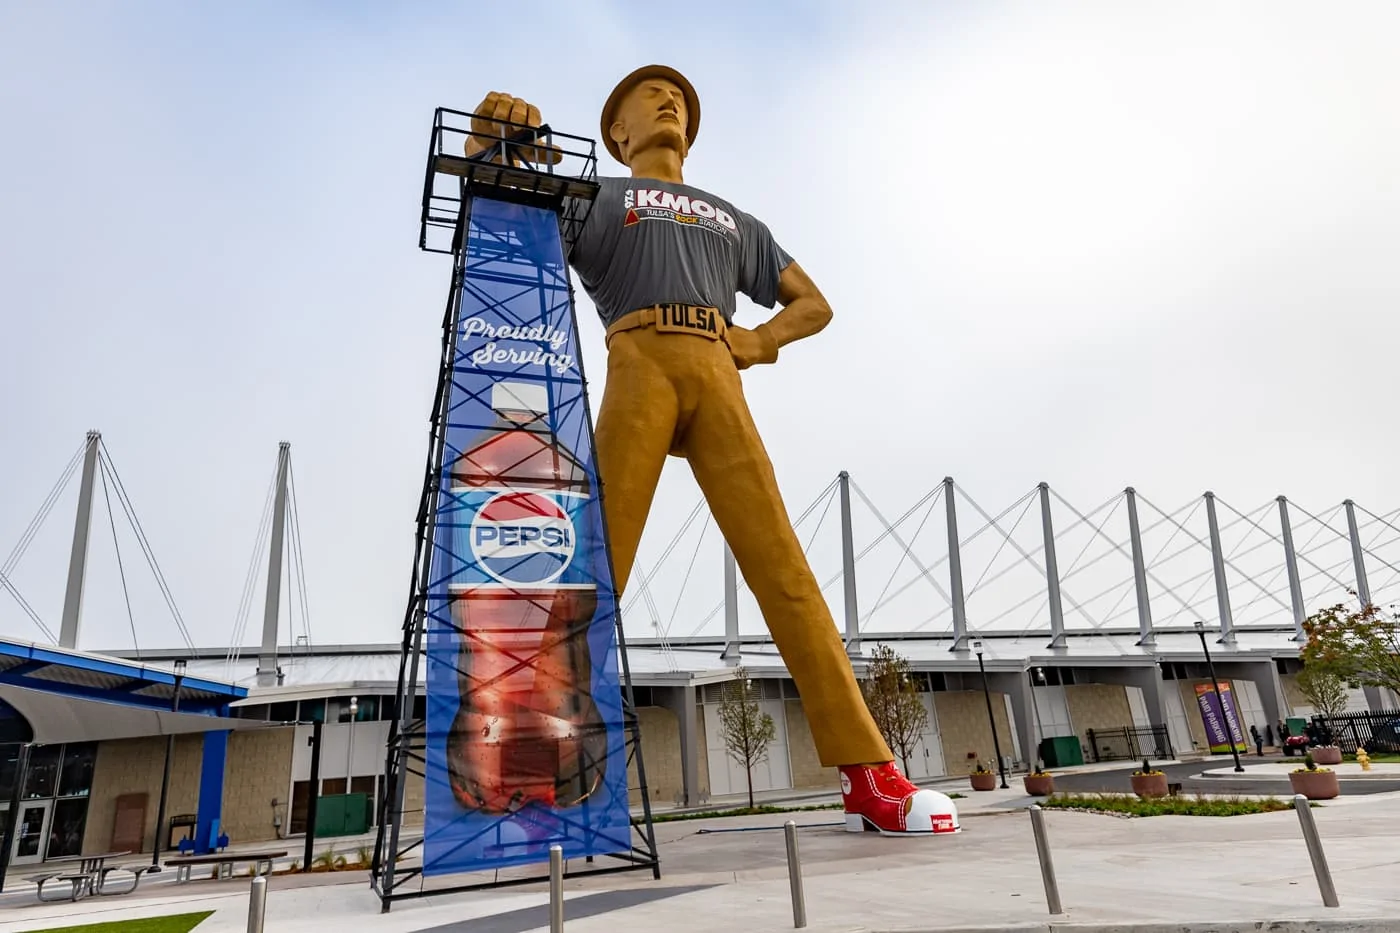 The Golden Driller in Tulsa, Oklahoma roadside attraction on Route 66